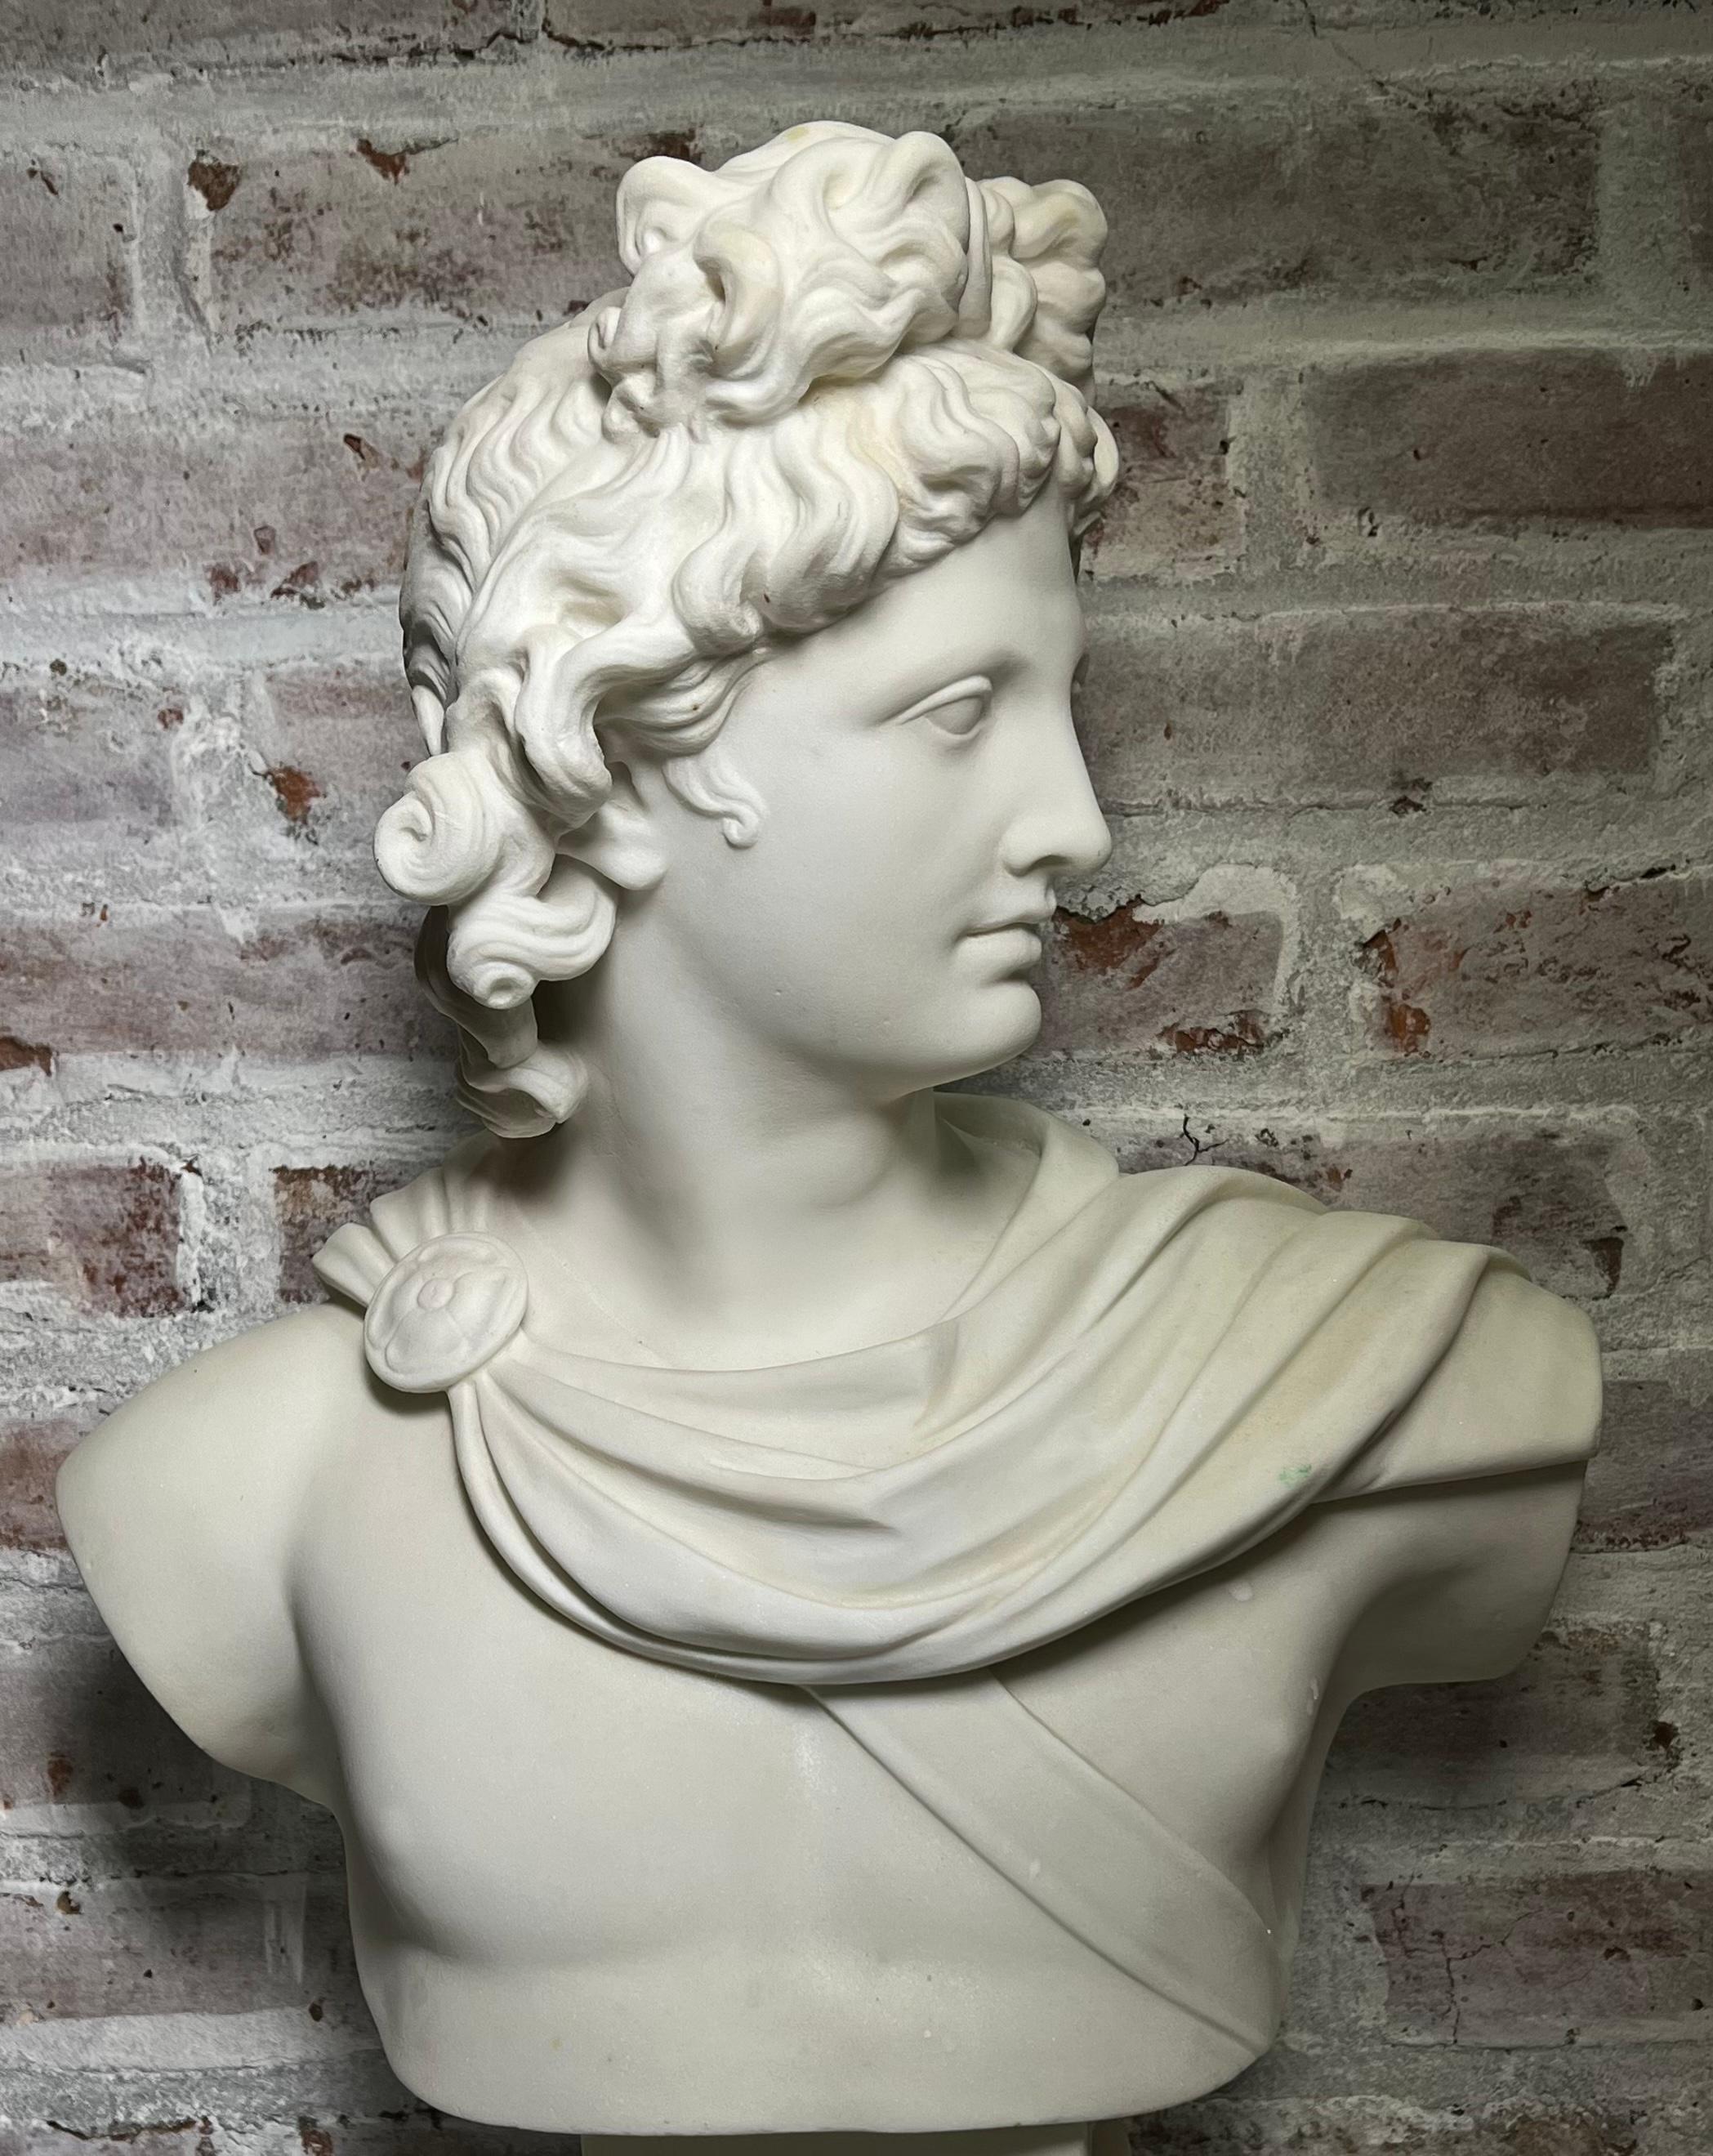 Large 19th Century Antique Marble Bust of Apollo of Belvedere - Academic Sculpture by Pietro Bazzanti